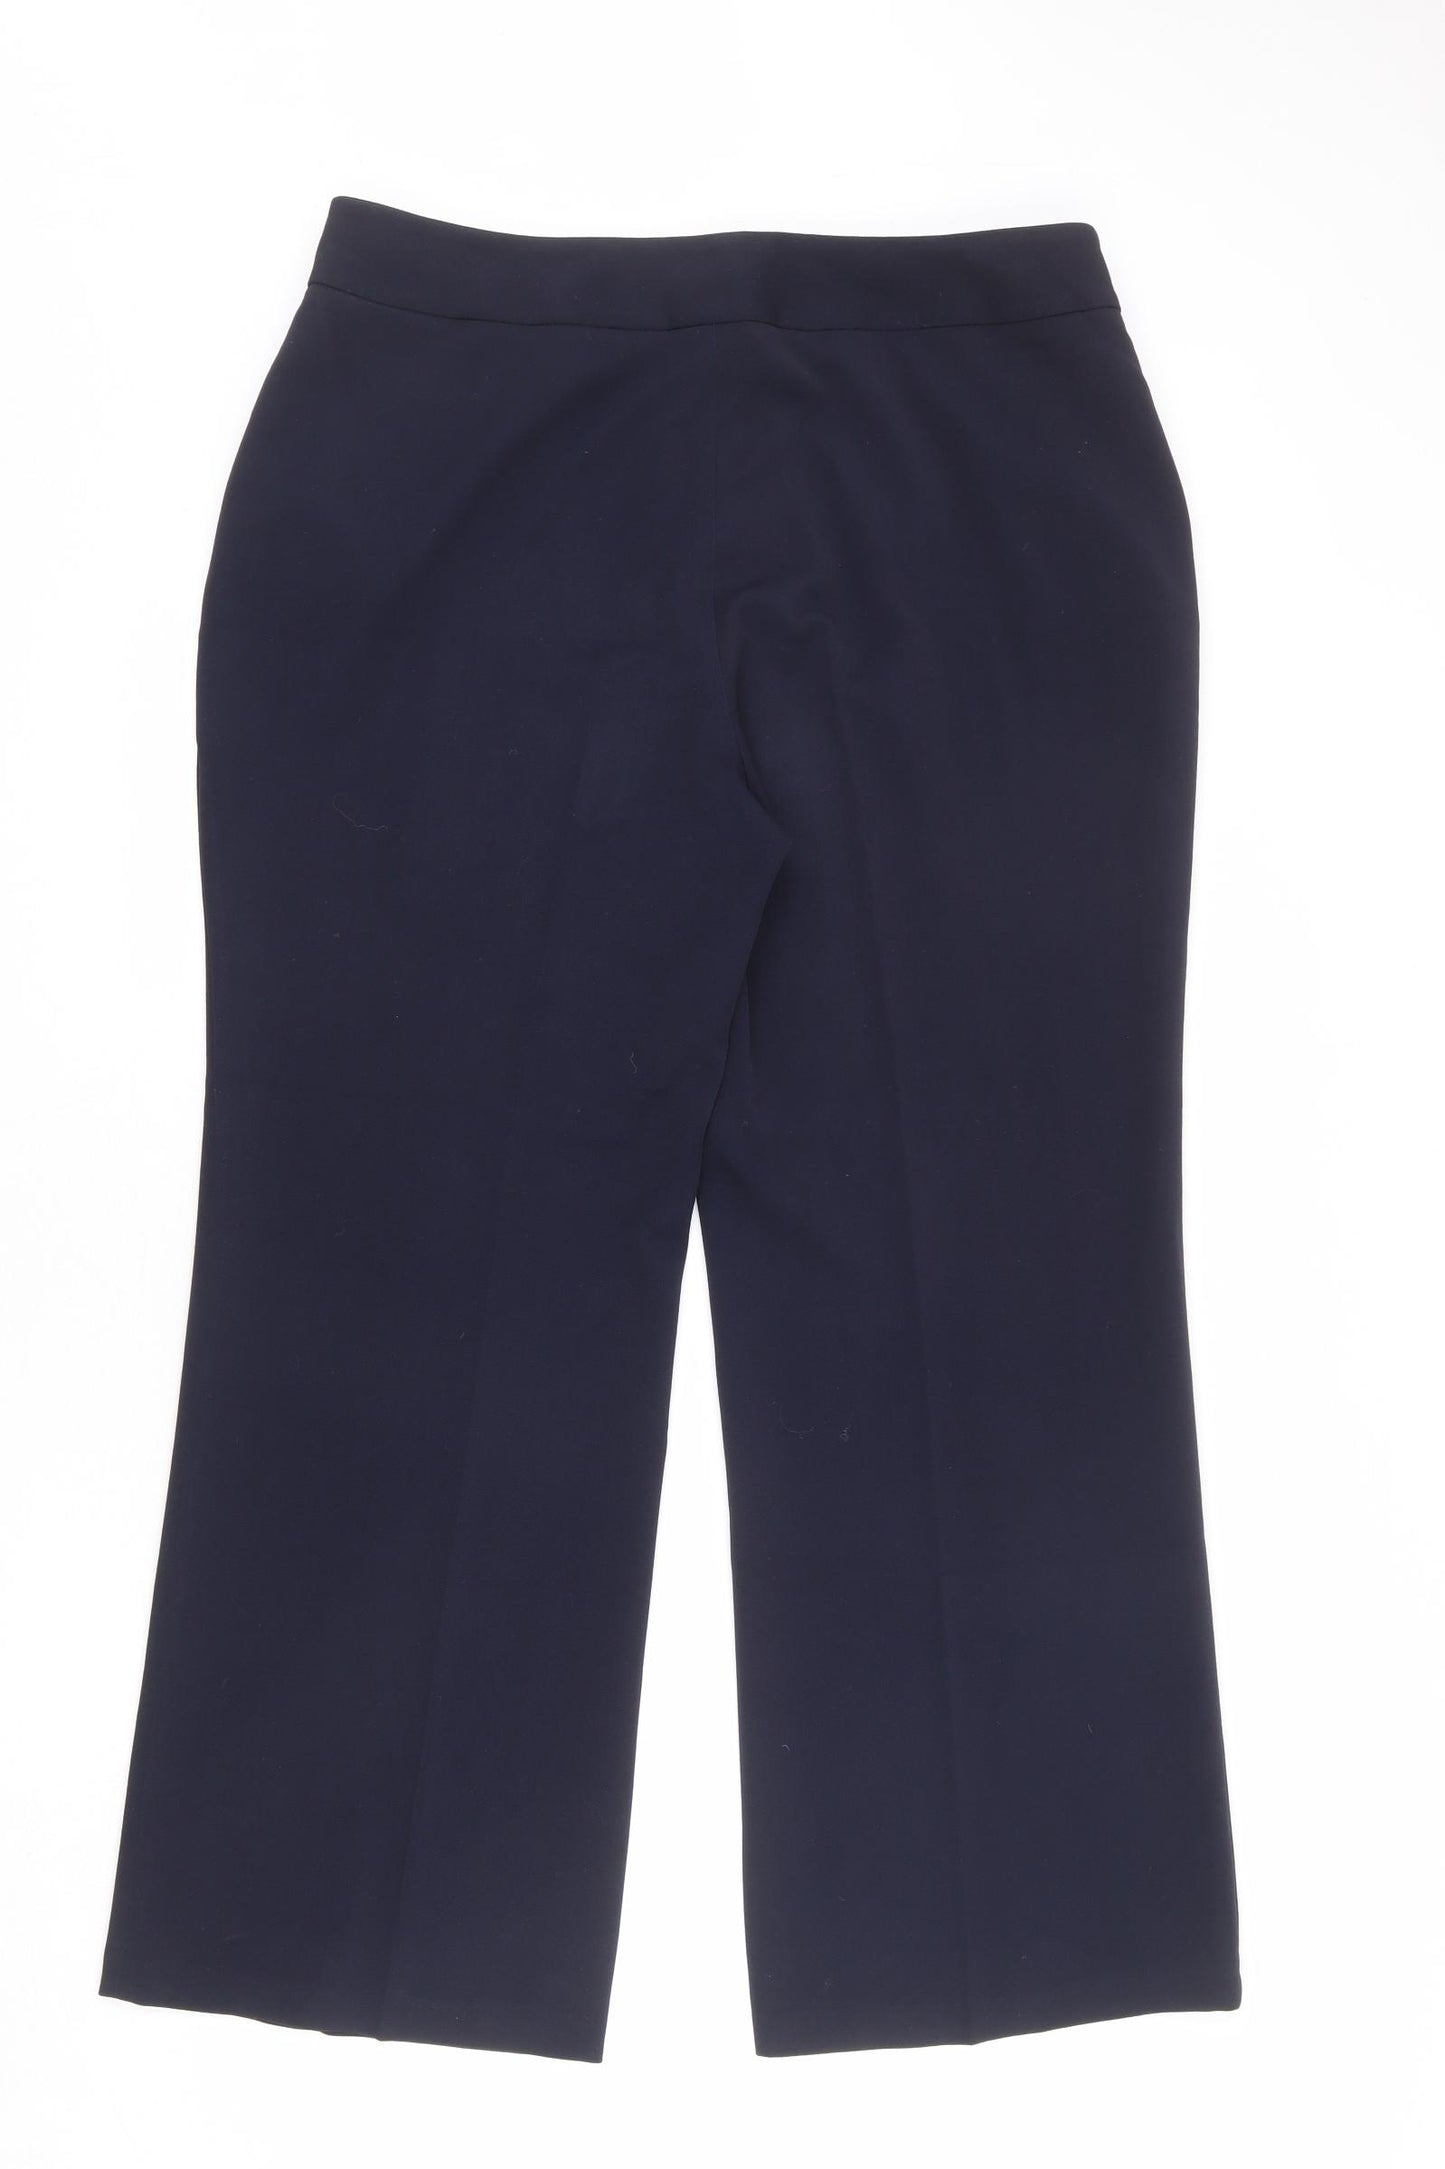 Bonmarché Womens Blue Polyester Trousers Size 16 L28 in Regular Zip